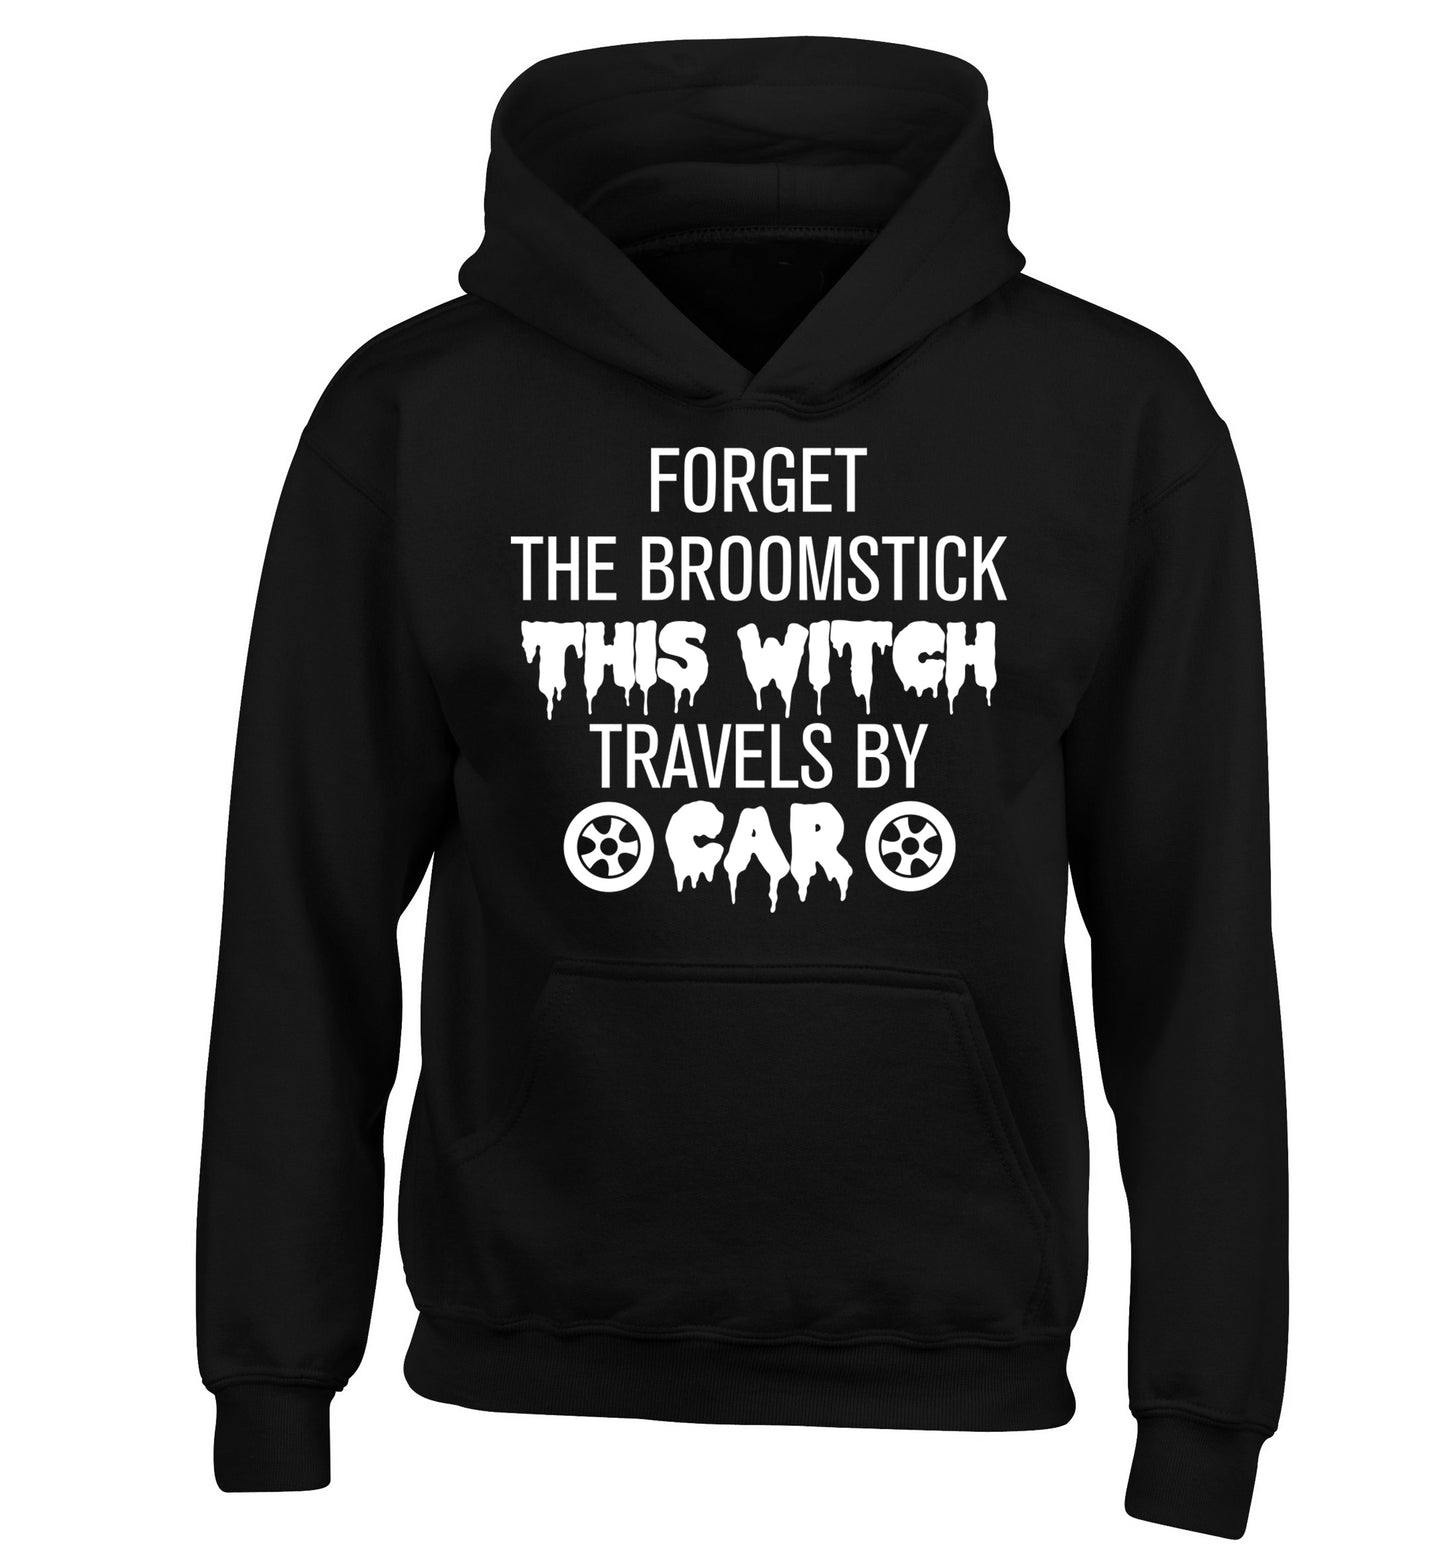 Forget the broomstick this witch travels by car children's black hoodie 12-14 Years